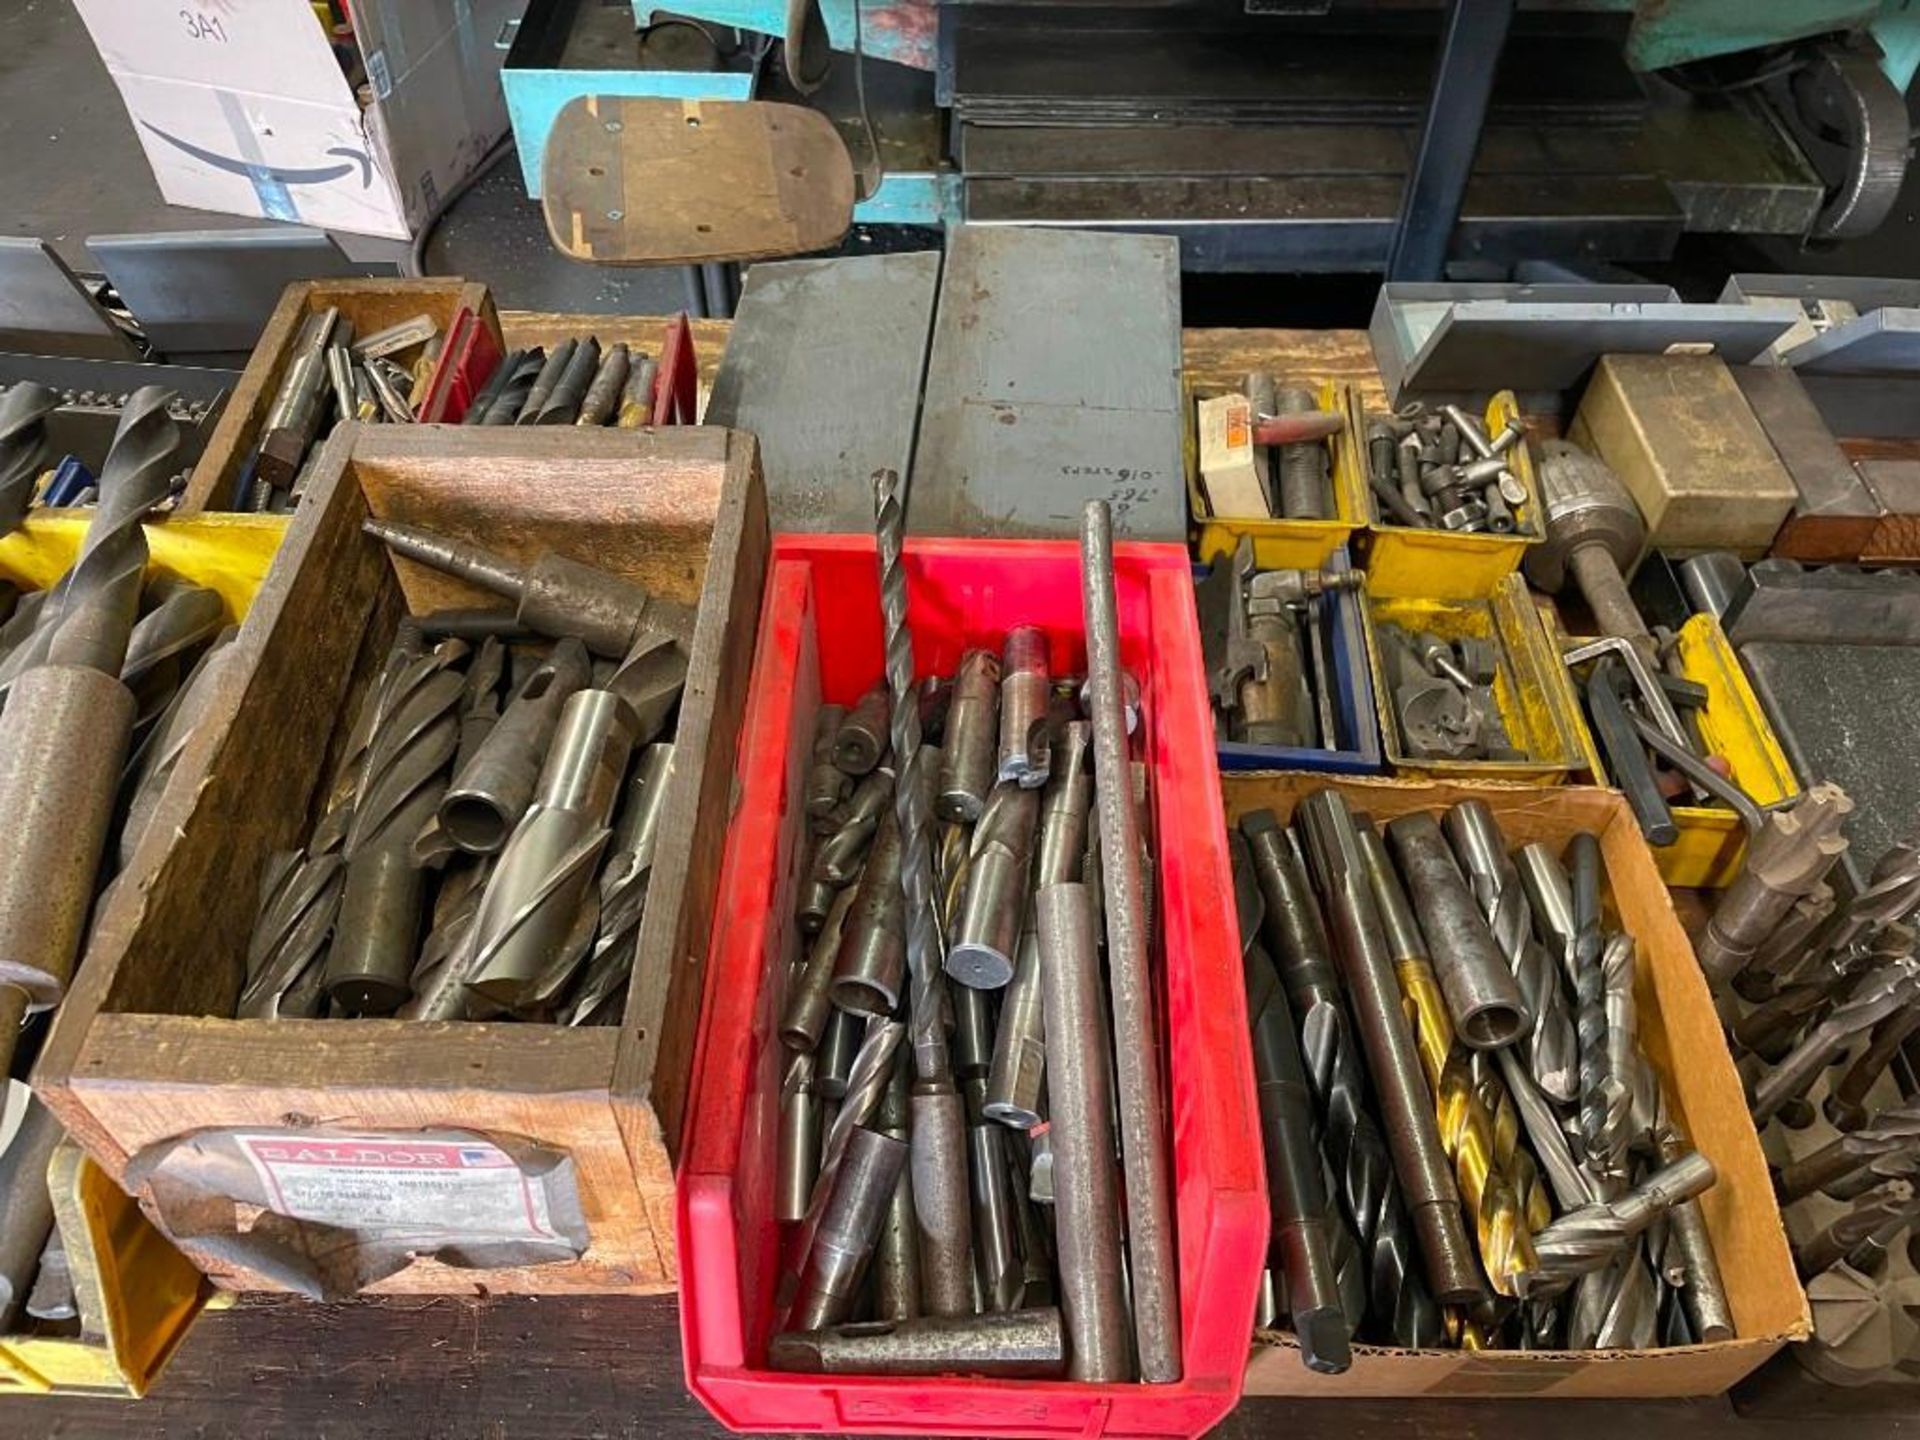 LARGE LOT OF DRILL BITS, REAMERS, IMPACT SOCKETS, MILLING AND LATHE TOOLING - Image 2 of 10